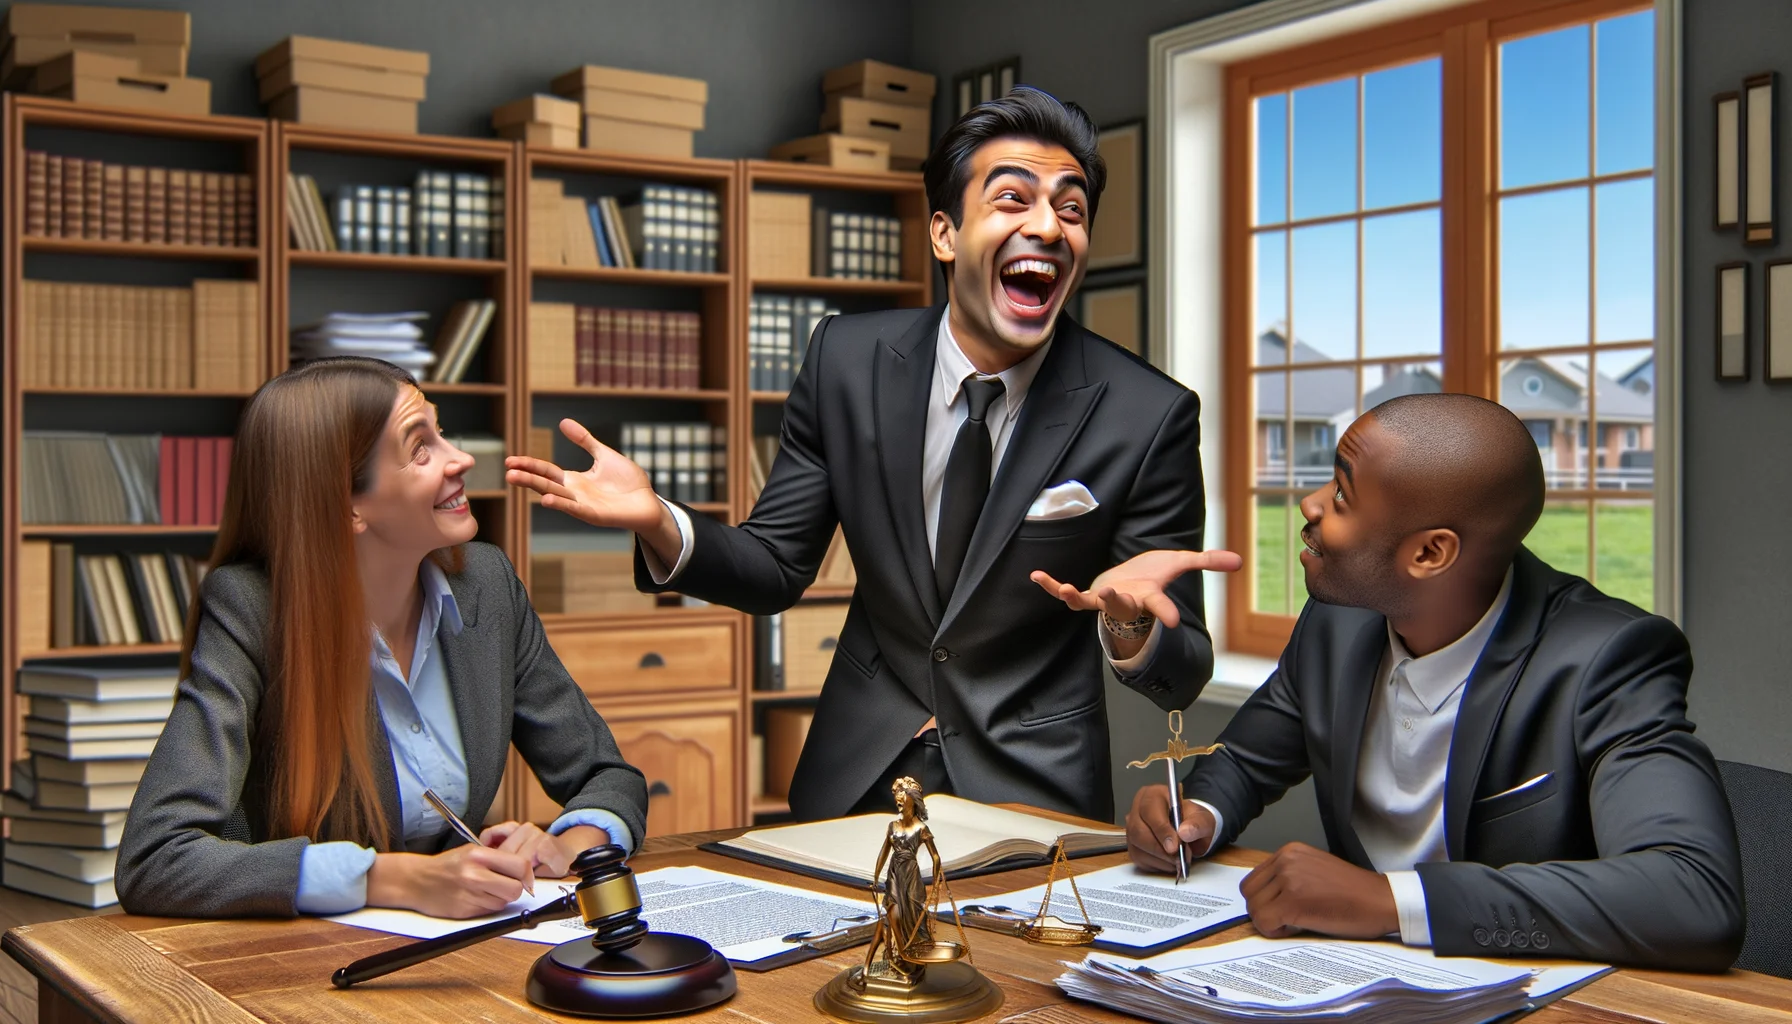 Generate a humorous, realistic image that enlightens home buyers about the legal nuances involved in property purchase in an ideal situation. Illustrate a jubilant South Asian male lawyer in formal suit elucidating legal intricacies to an interested audience - a Caucasian female home buyer listening attentively and a Black male first-time homeowner jotting down important points. Add visual cues hinting legal documents, property papers and legal codes subtly in the scene, and make sure the ambiance is lighthearted, with a touch of comedy symbolizing perfect, worry-free home buying scenario.